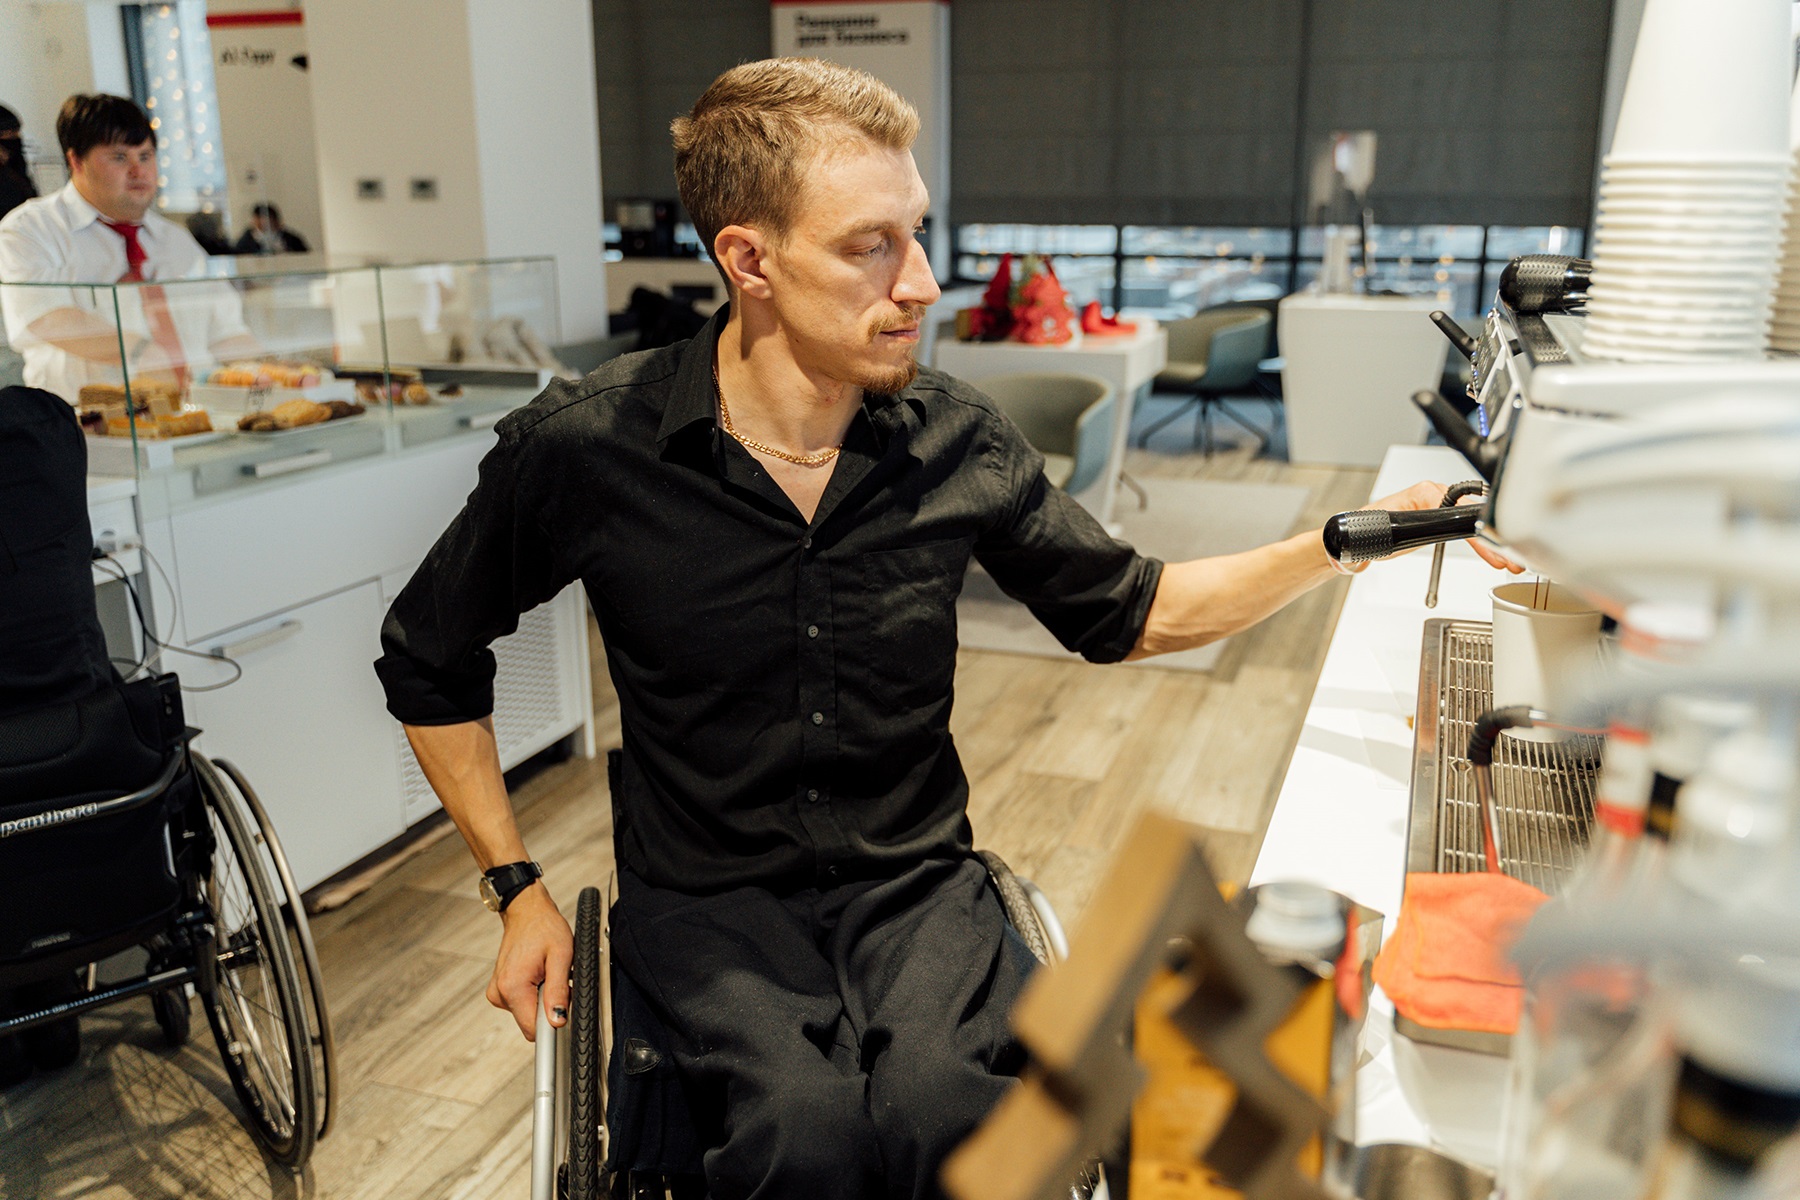 Photo of a man in a wheelchair using a coffee machine in a cafe.